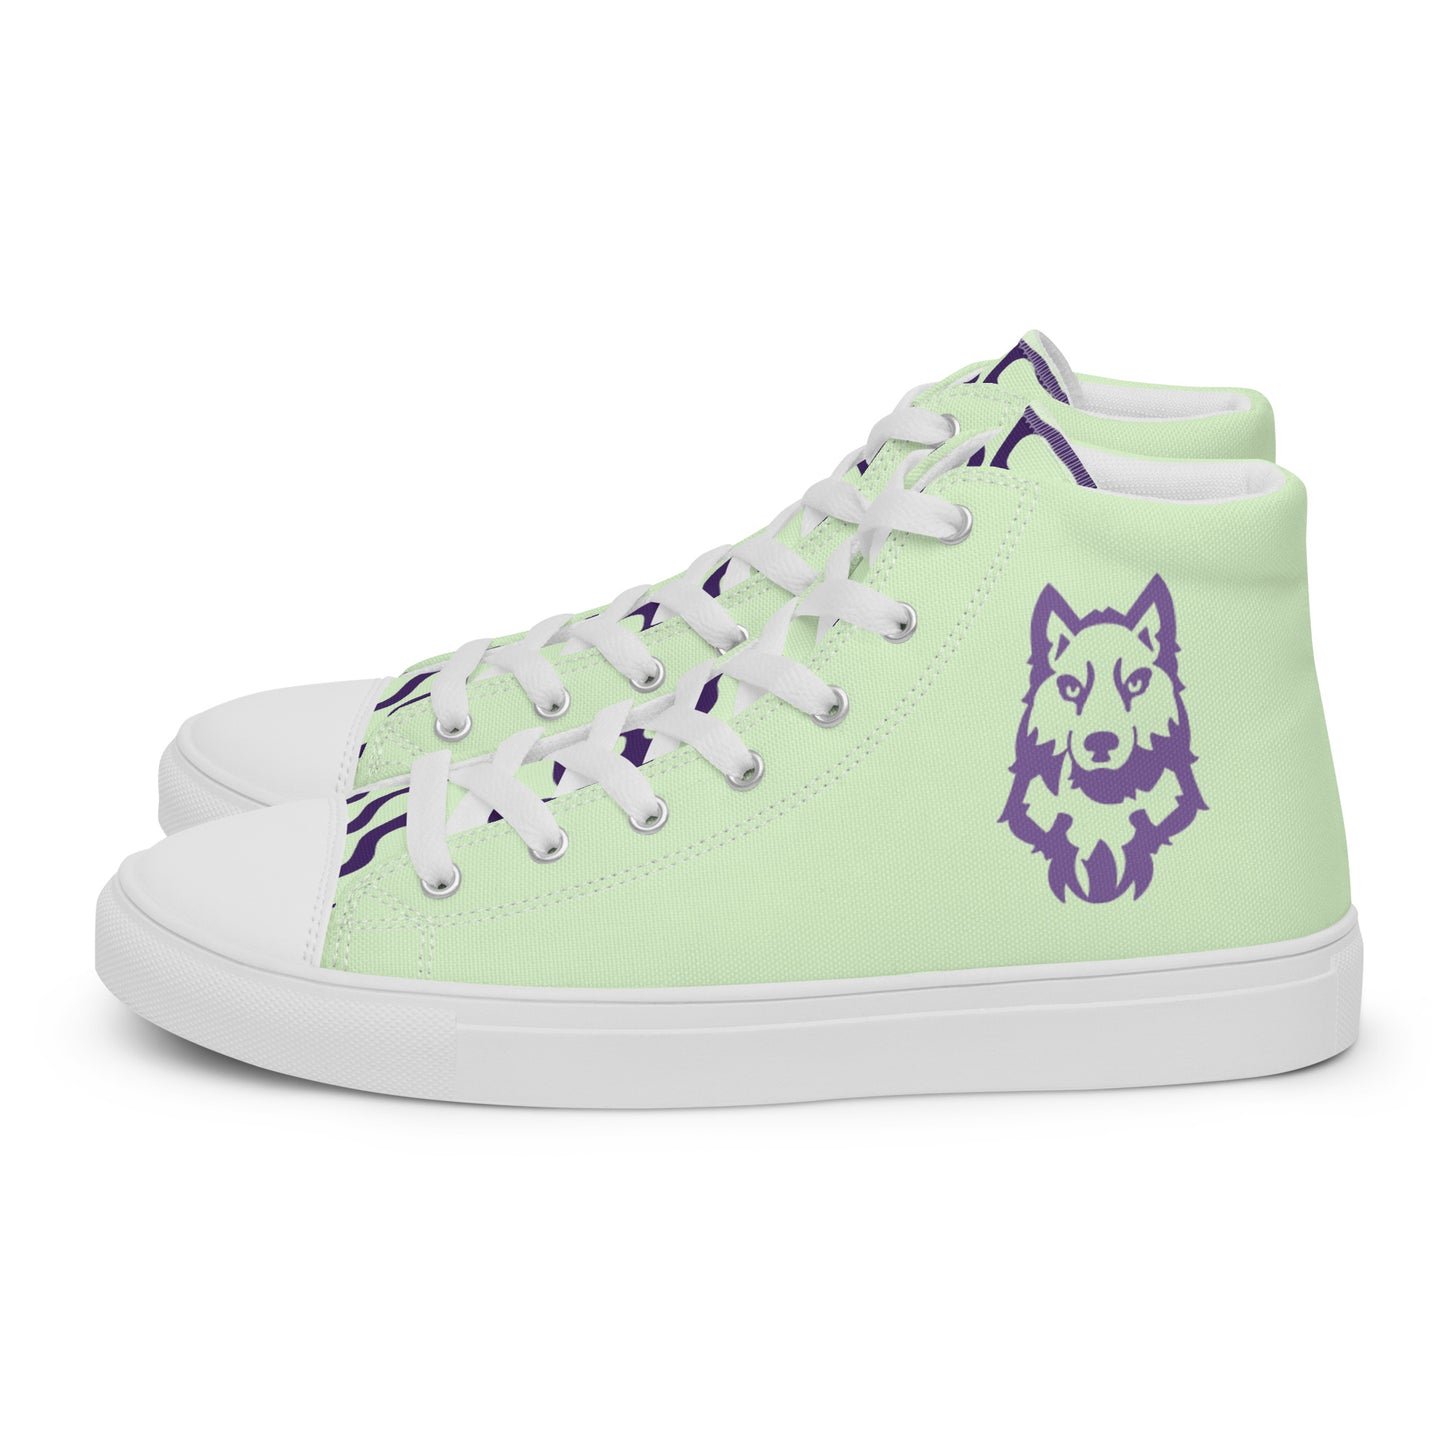 Stewart's Passion Women’s high top canvas shoes